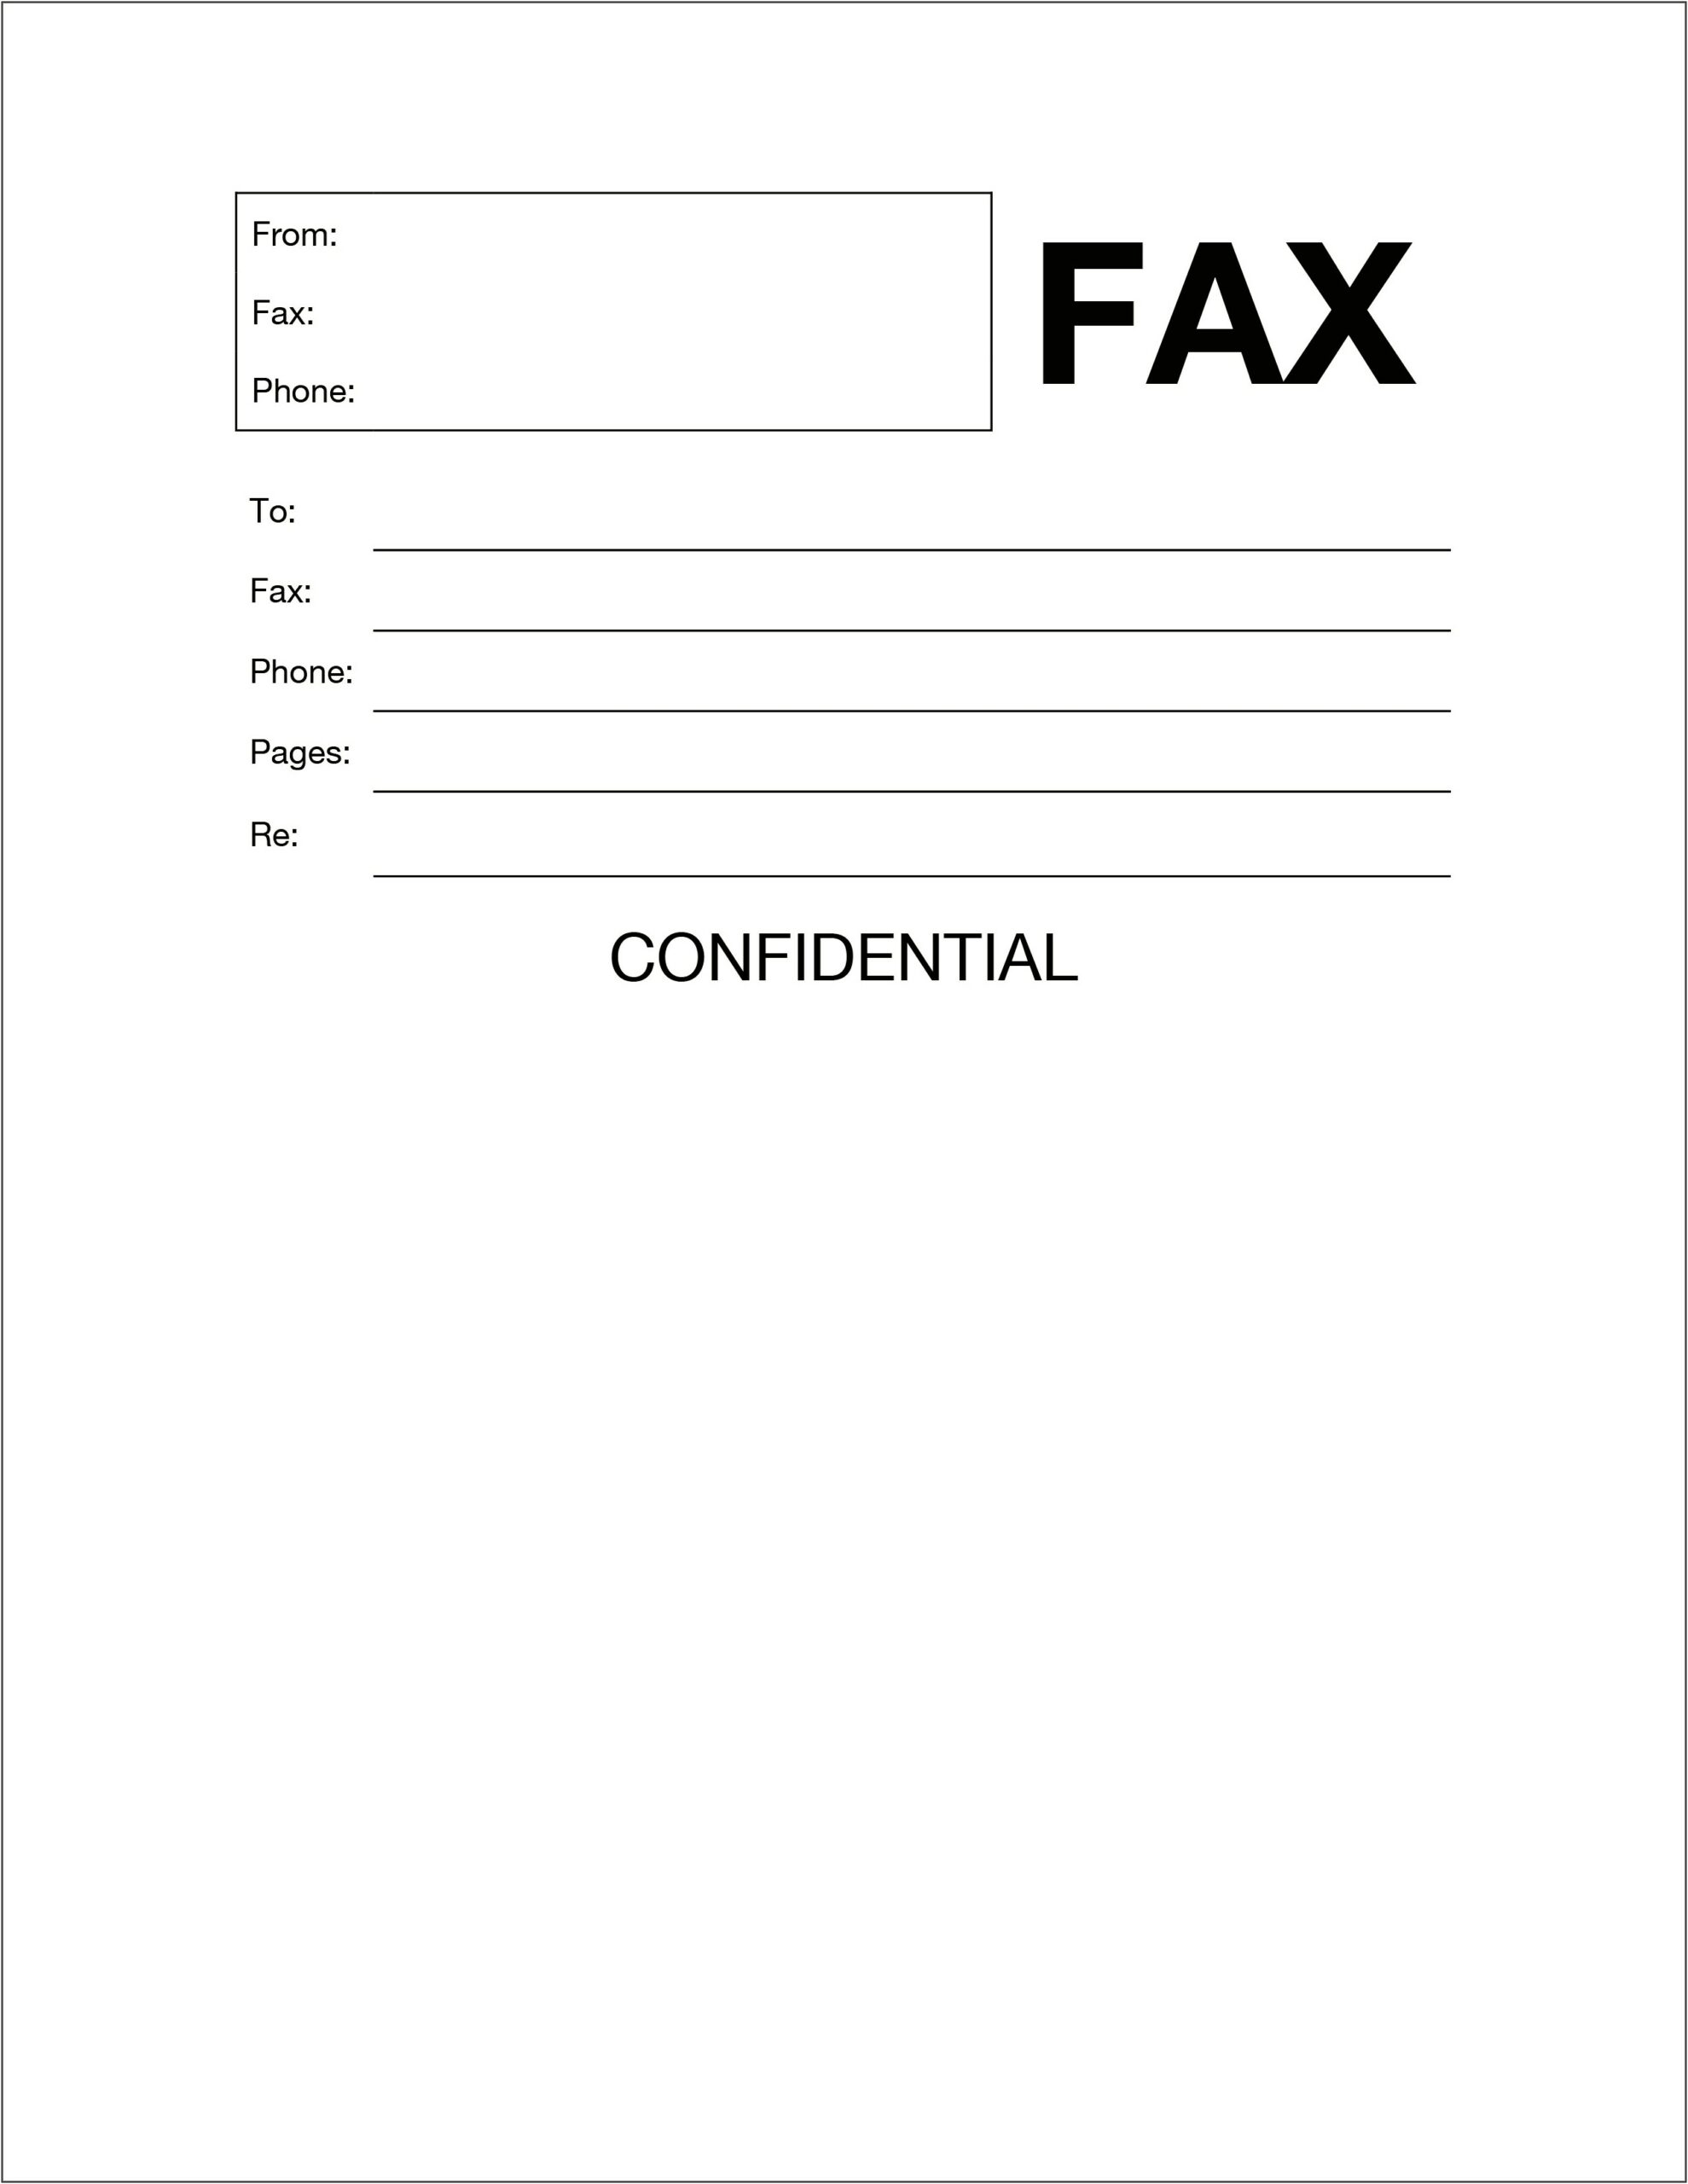 Personal Fax Cover Sheet Template Free